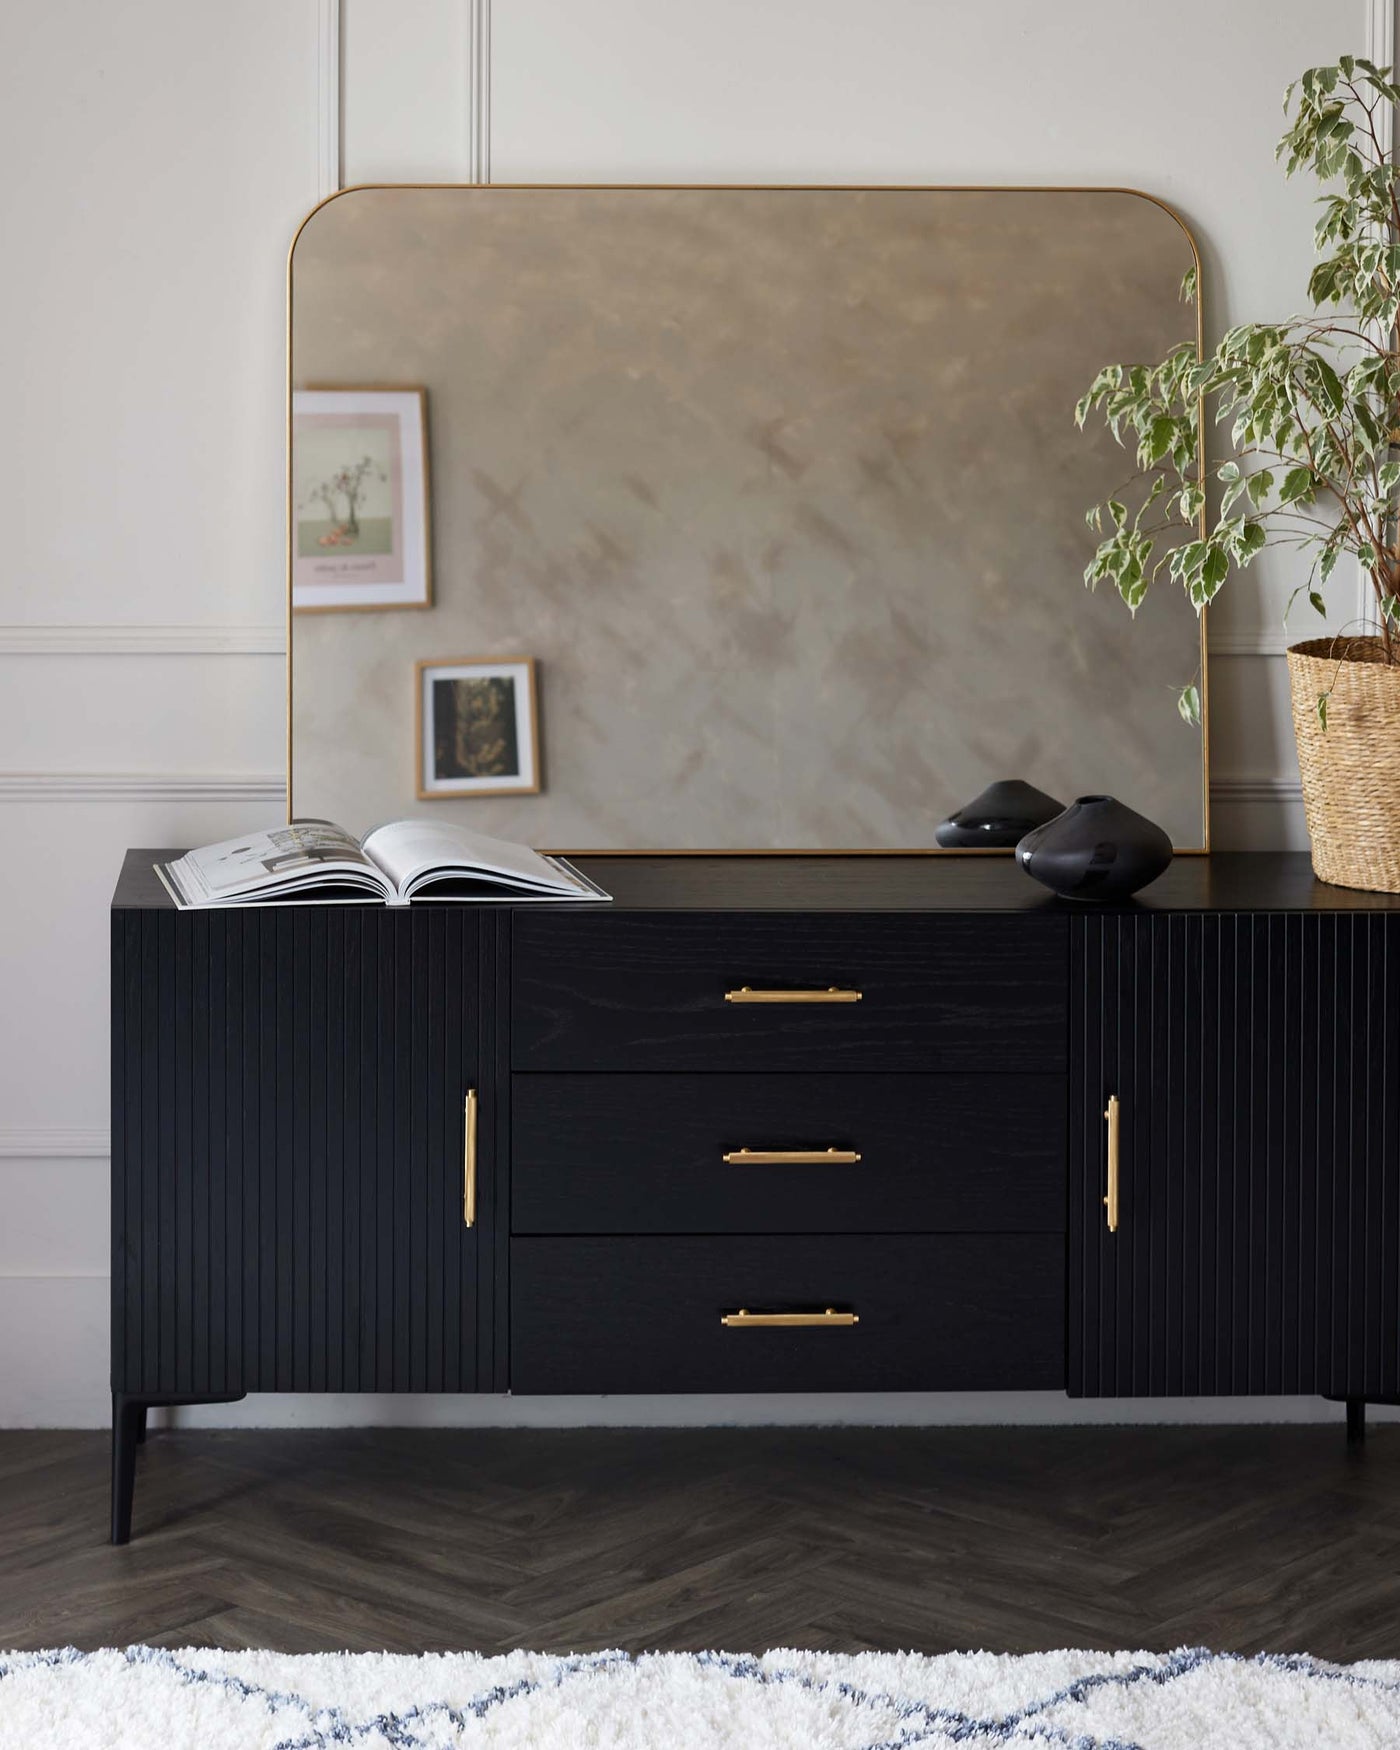 Elegant contemporary sideboard in black with textured front panels, featuring three drawers and two doors with brass handles, set on a slender black frame base.